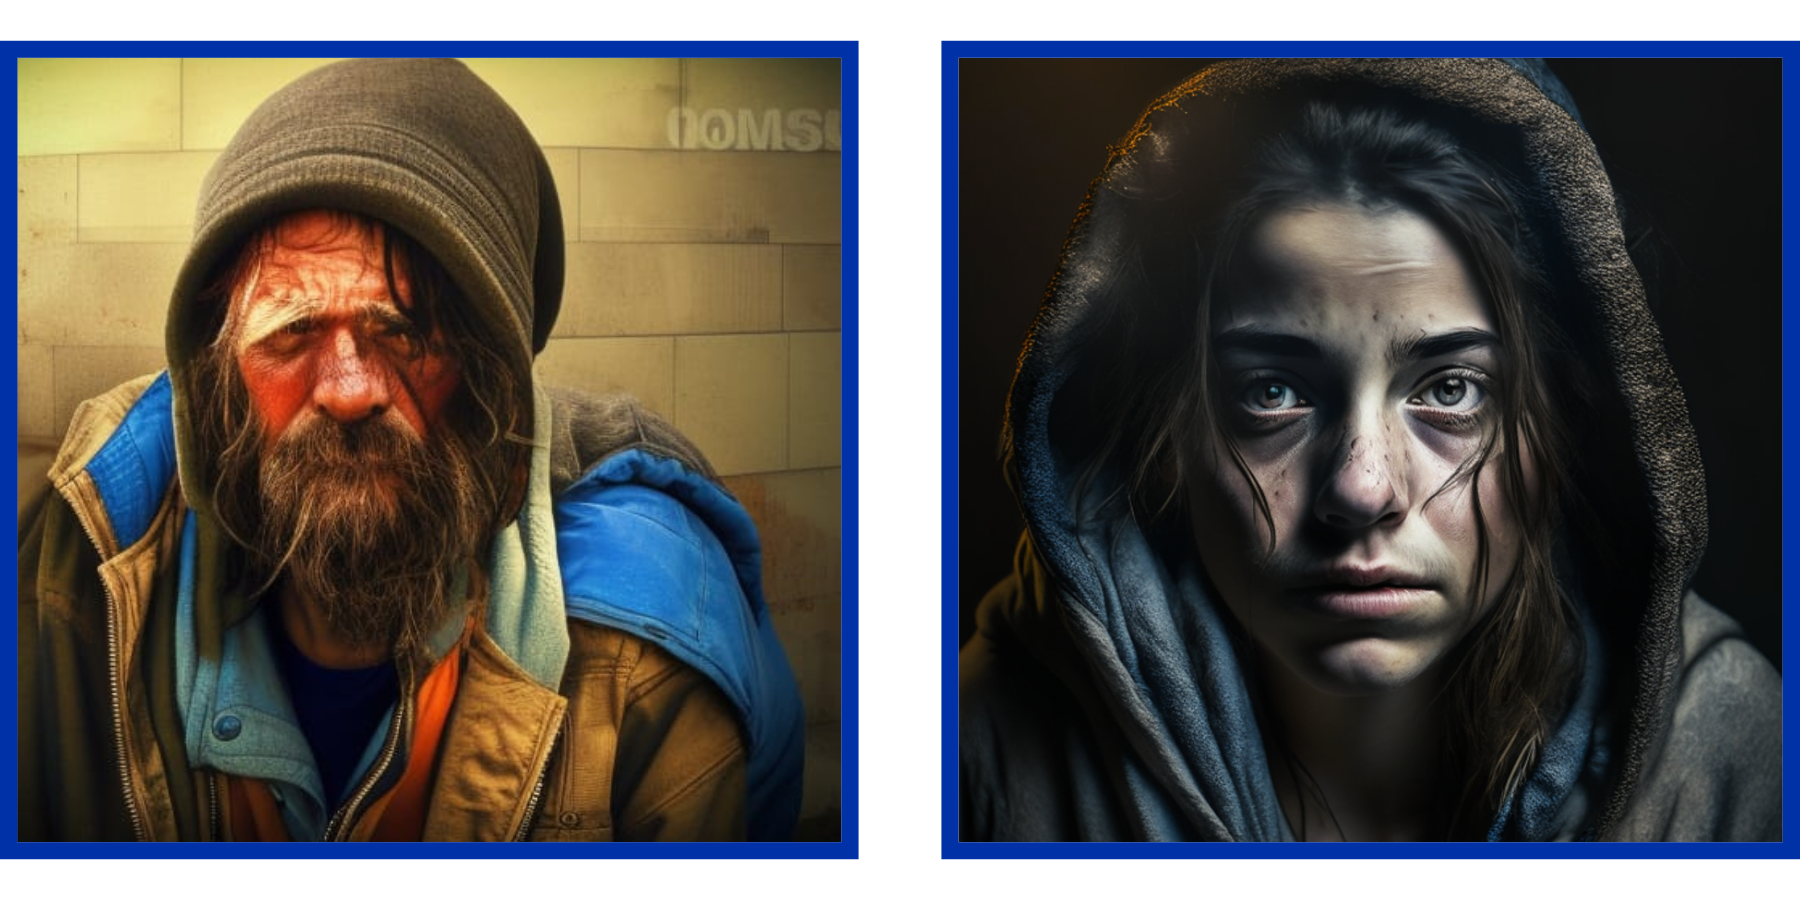 AI-generated images of people experiencing homelessness. They both look hopeless and disheveled. 